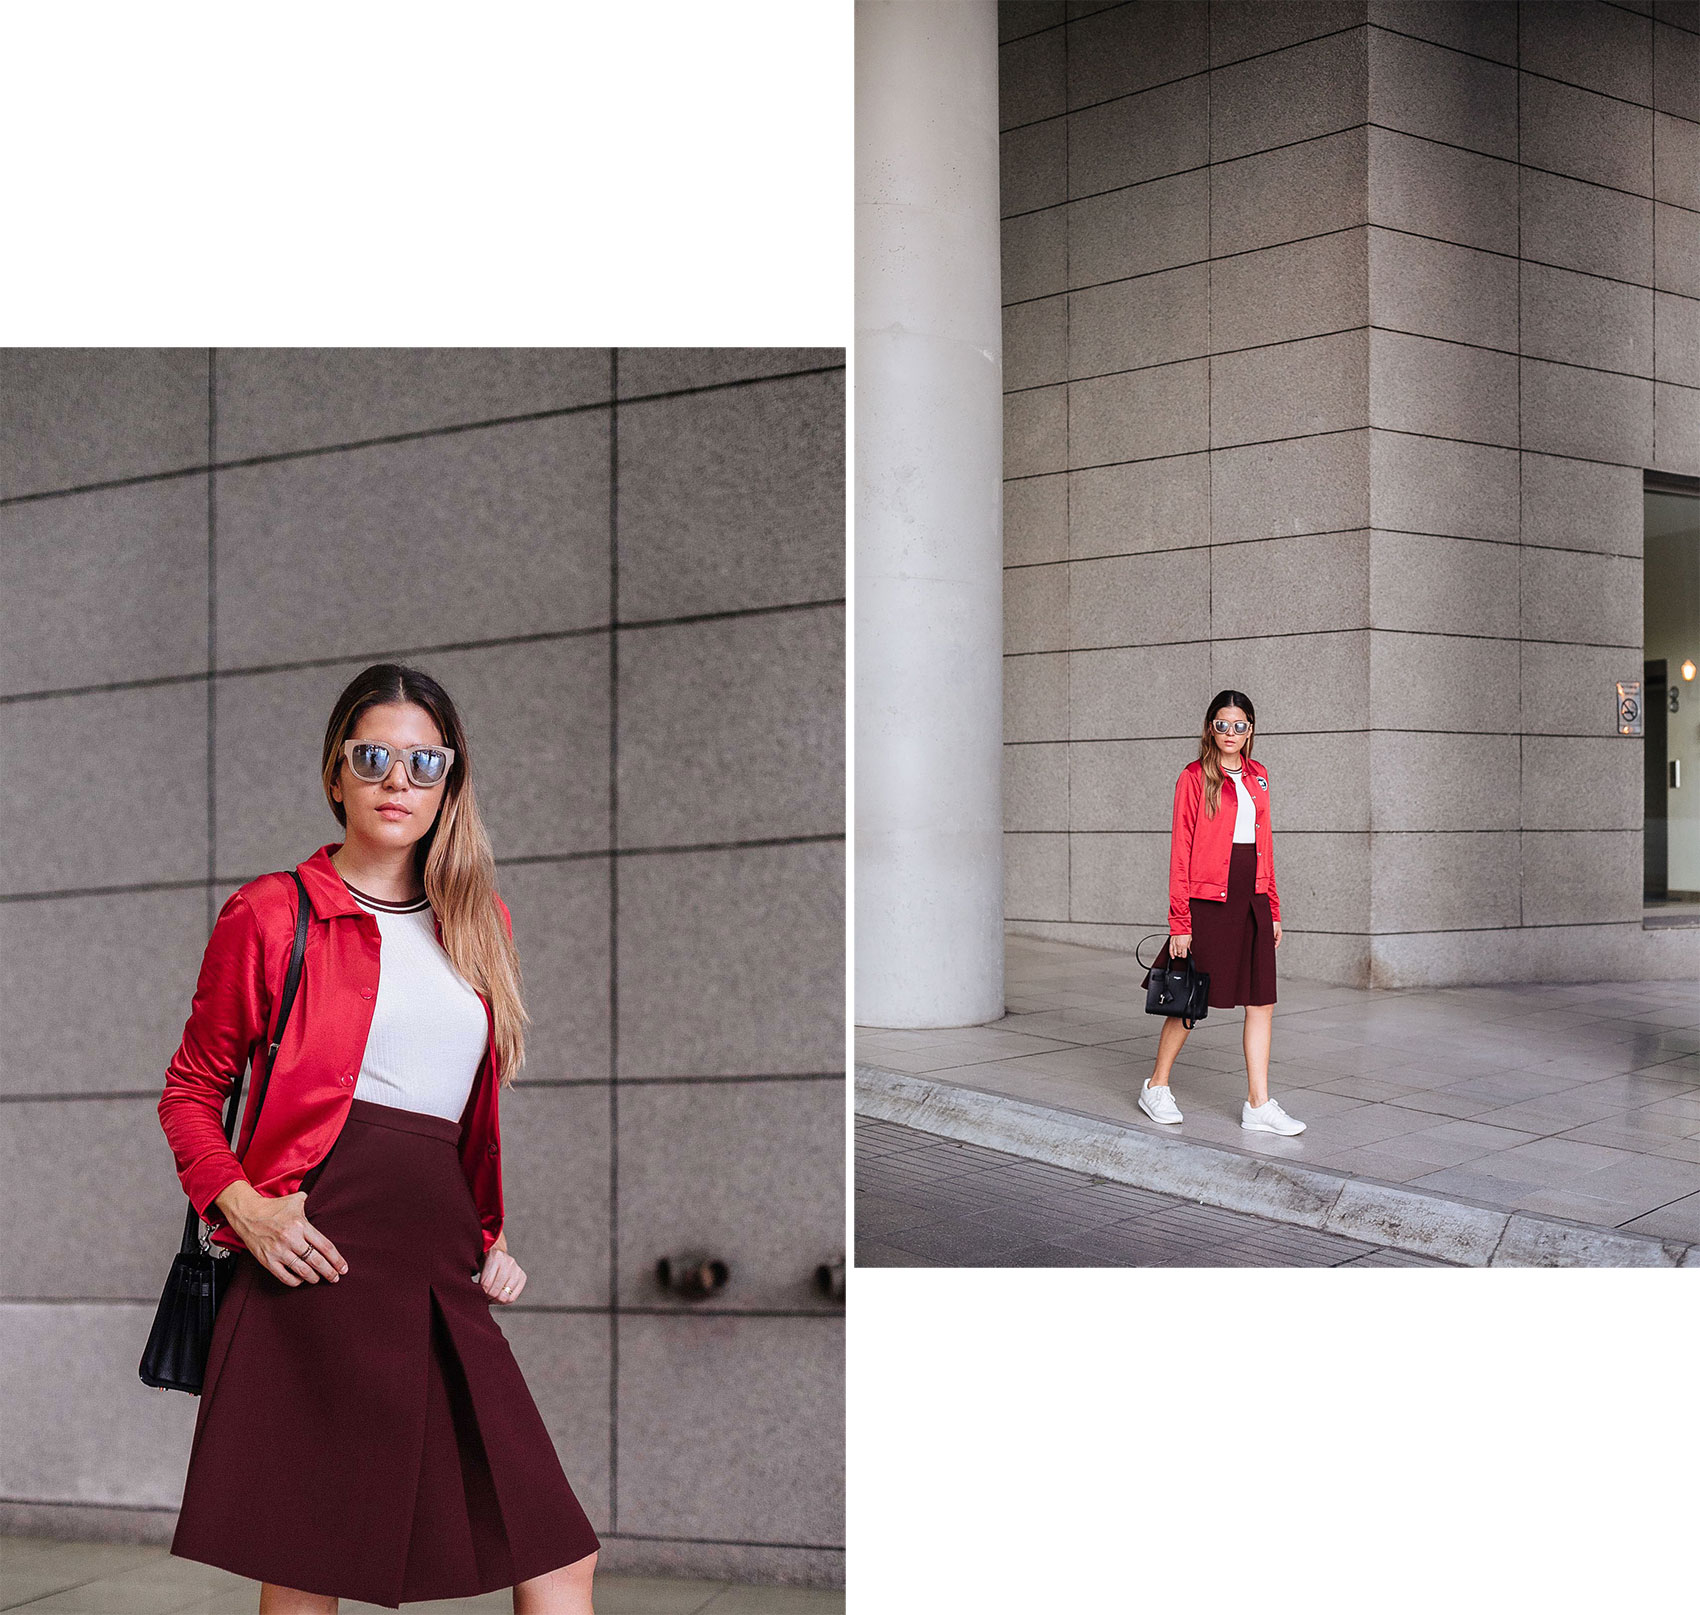 Blogger Maristella in an all red outfit mixing bright and dark hues for a statement street style inspired look